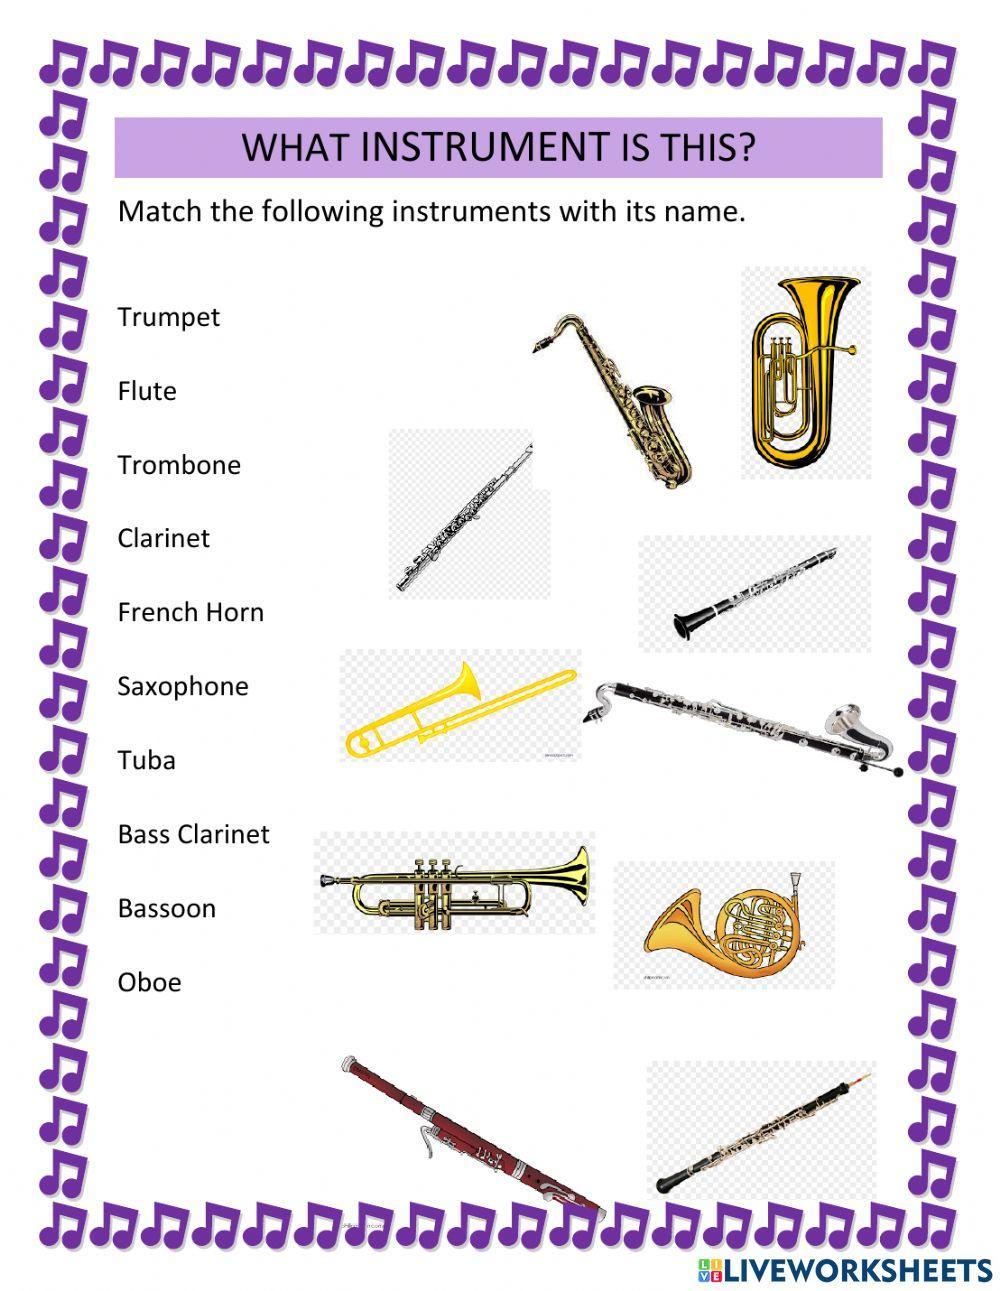 Name the instrument (wind version)